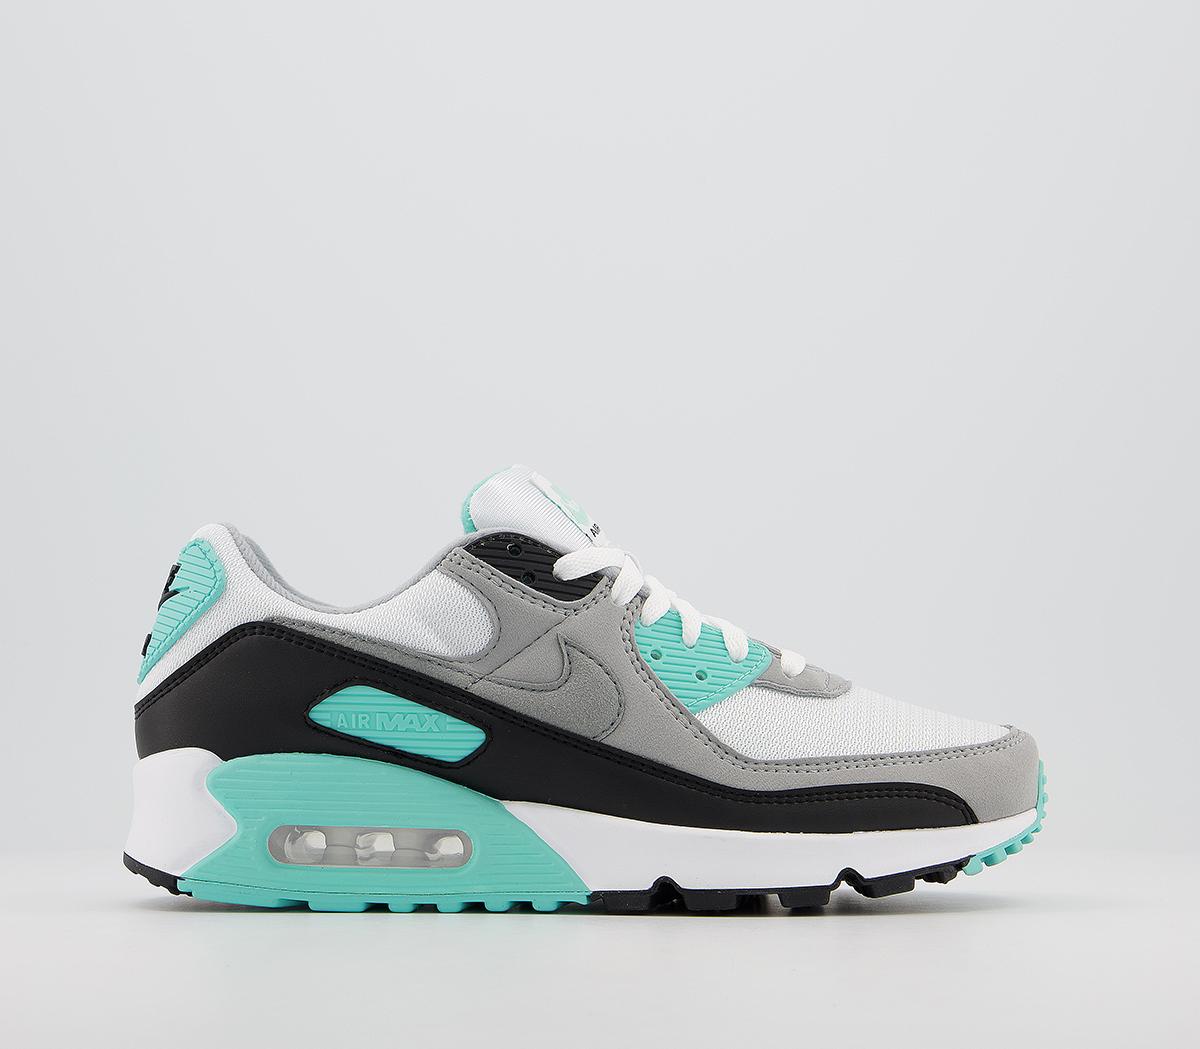 Turquoise Nike Air Max Online Sale, UP 